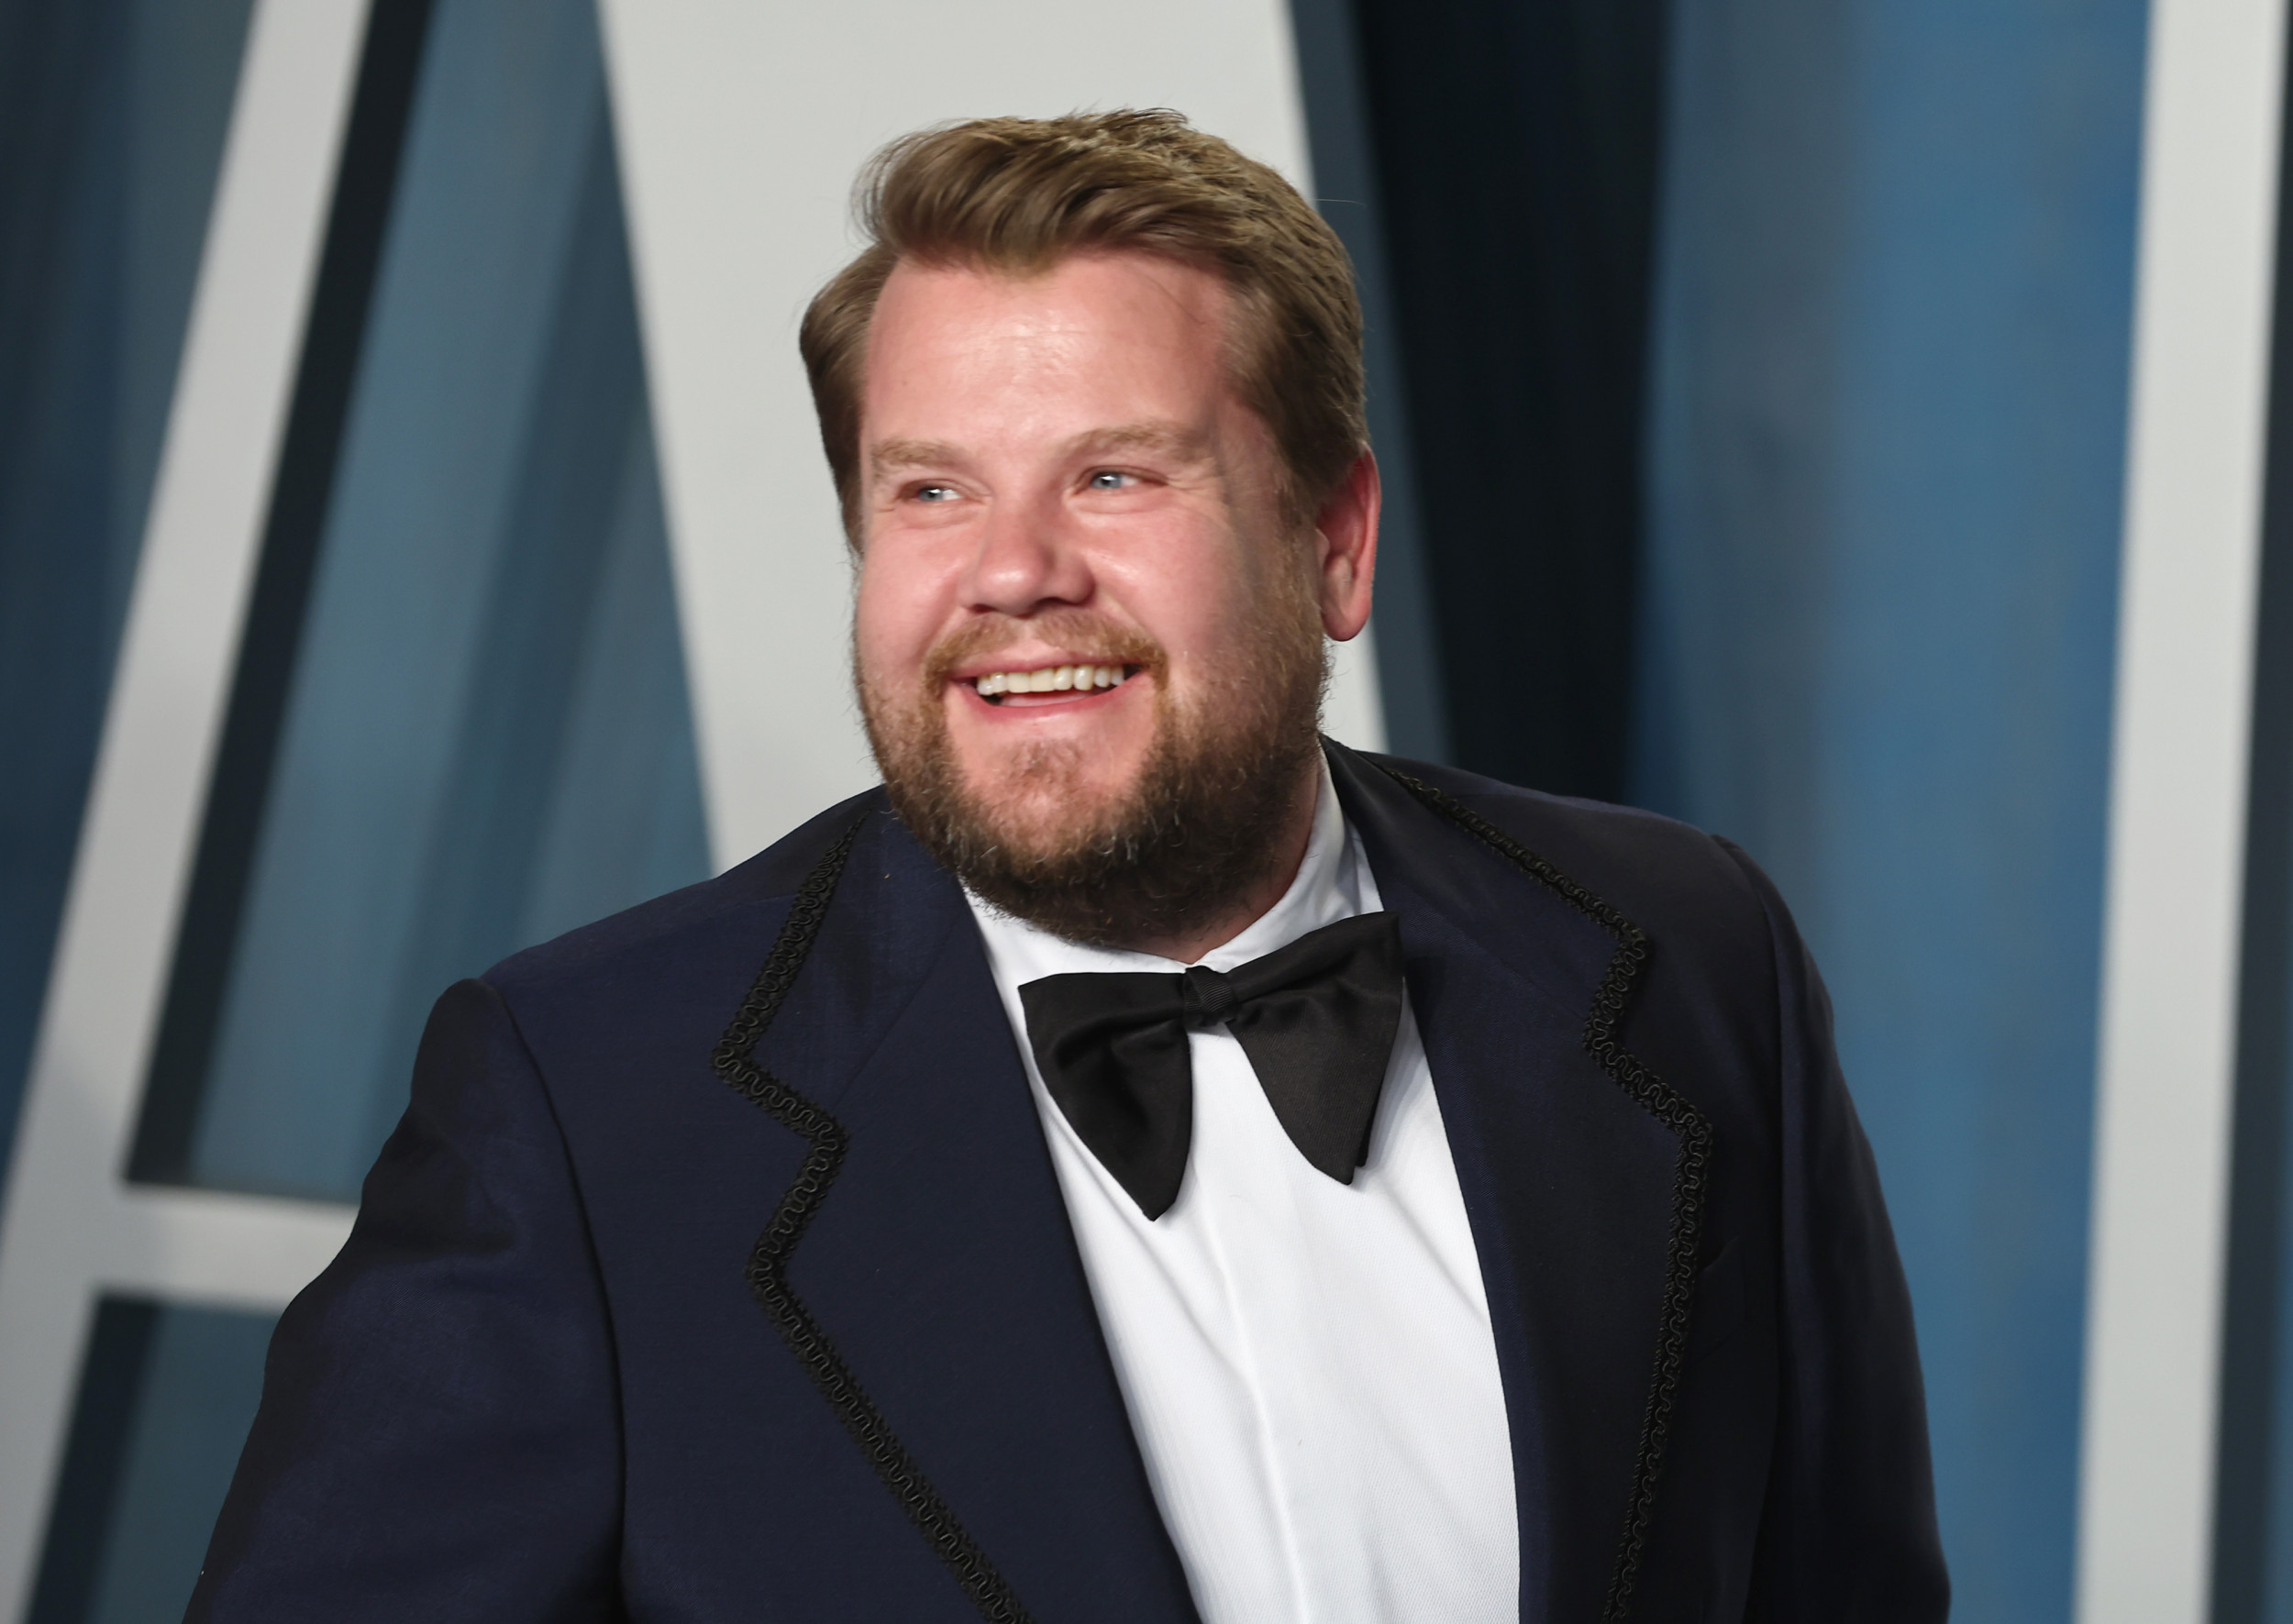 Why Was The Late Late Show Canceled? James Corden Left, Was He